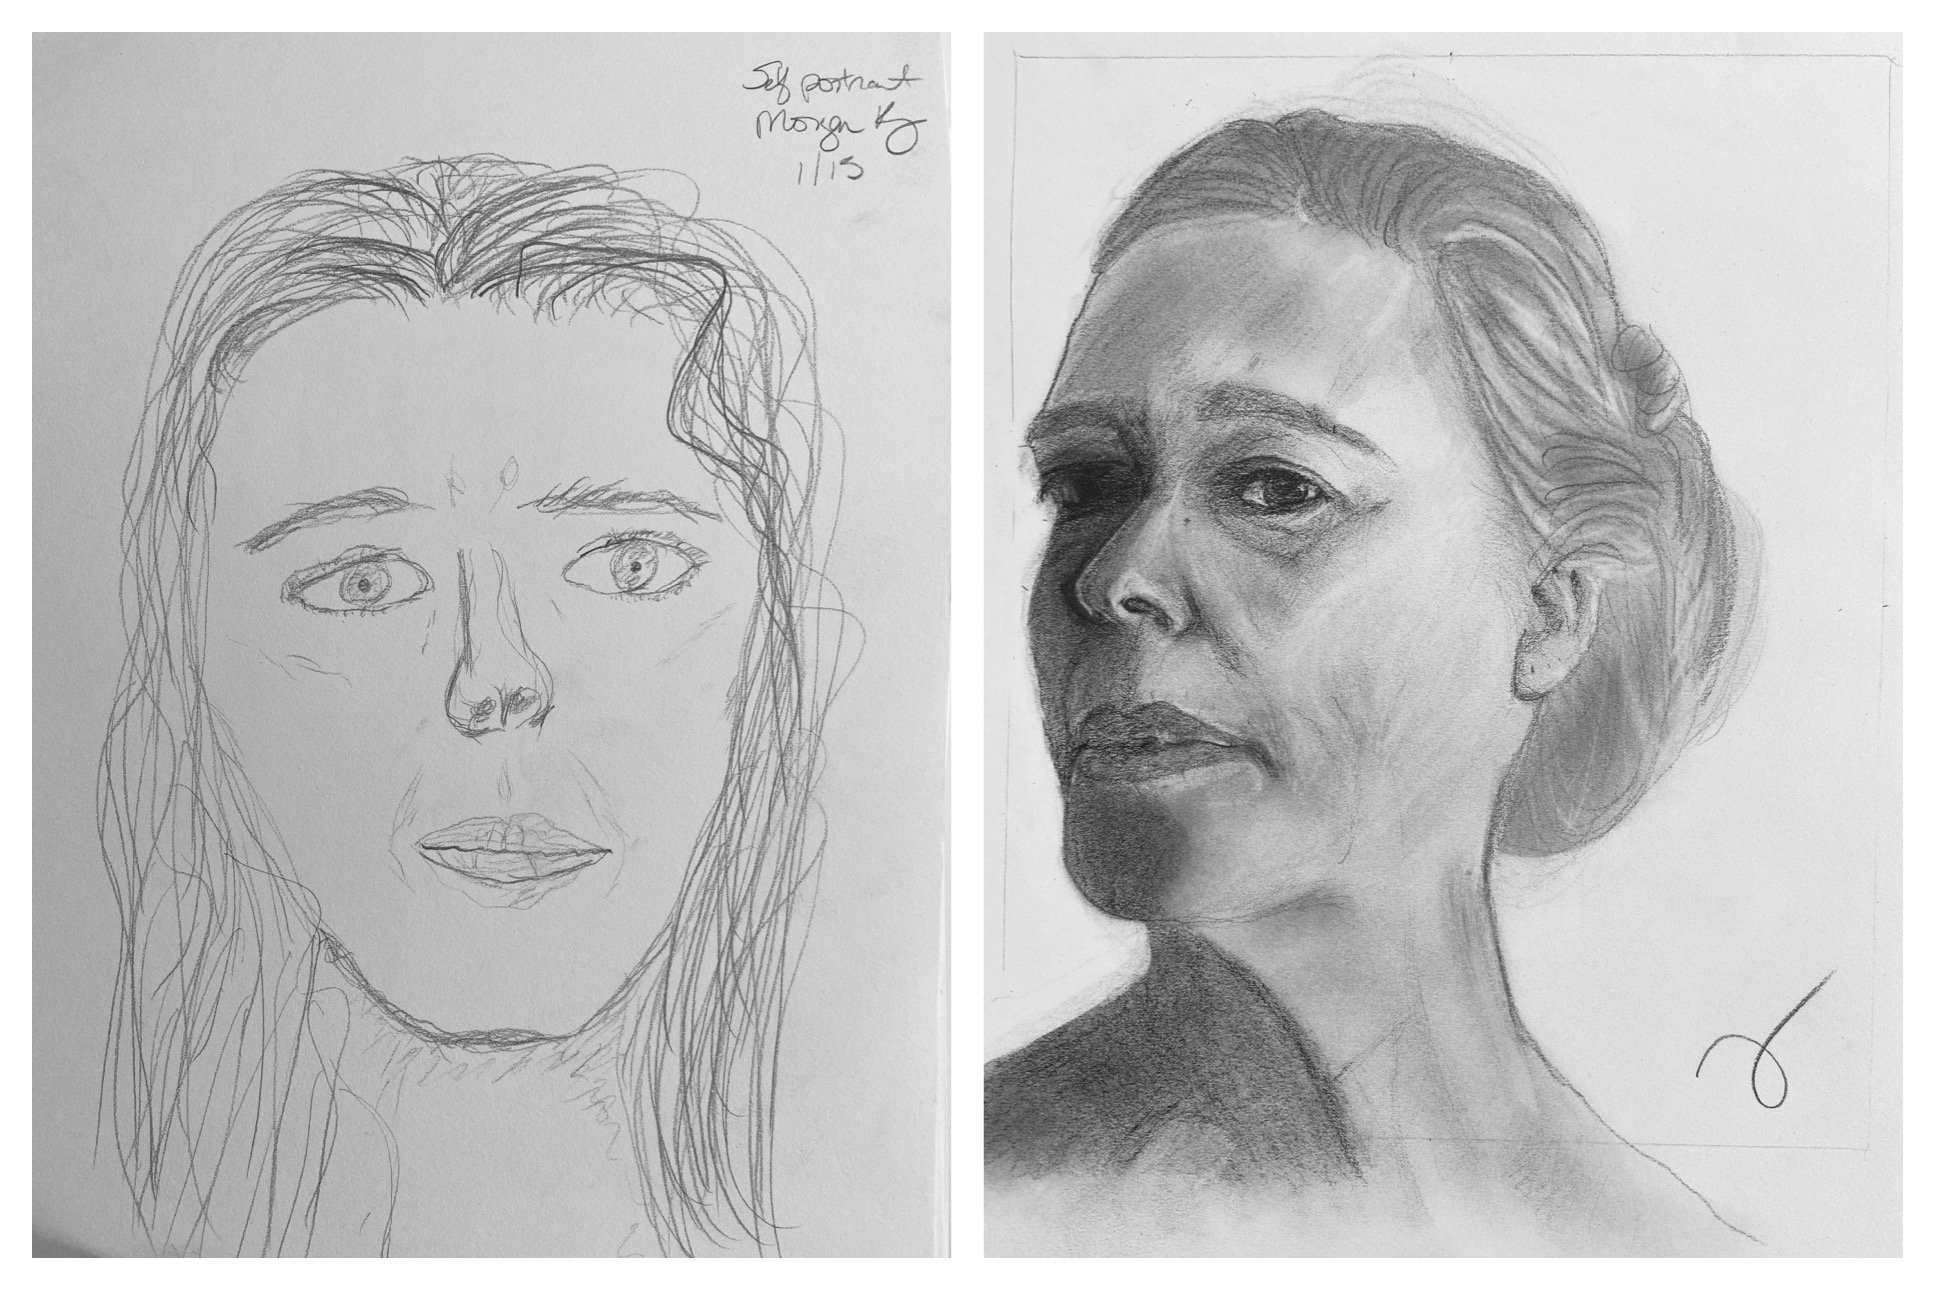 Morgan K's Before and After Drawings January 17-22, 2022